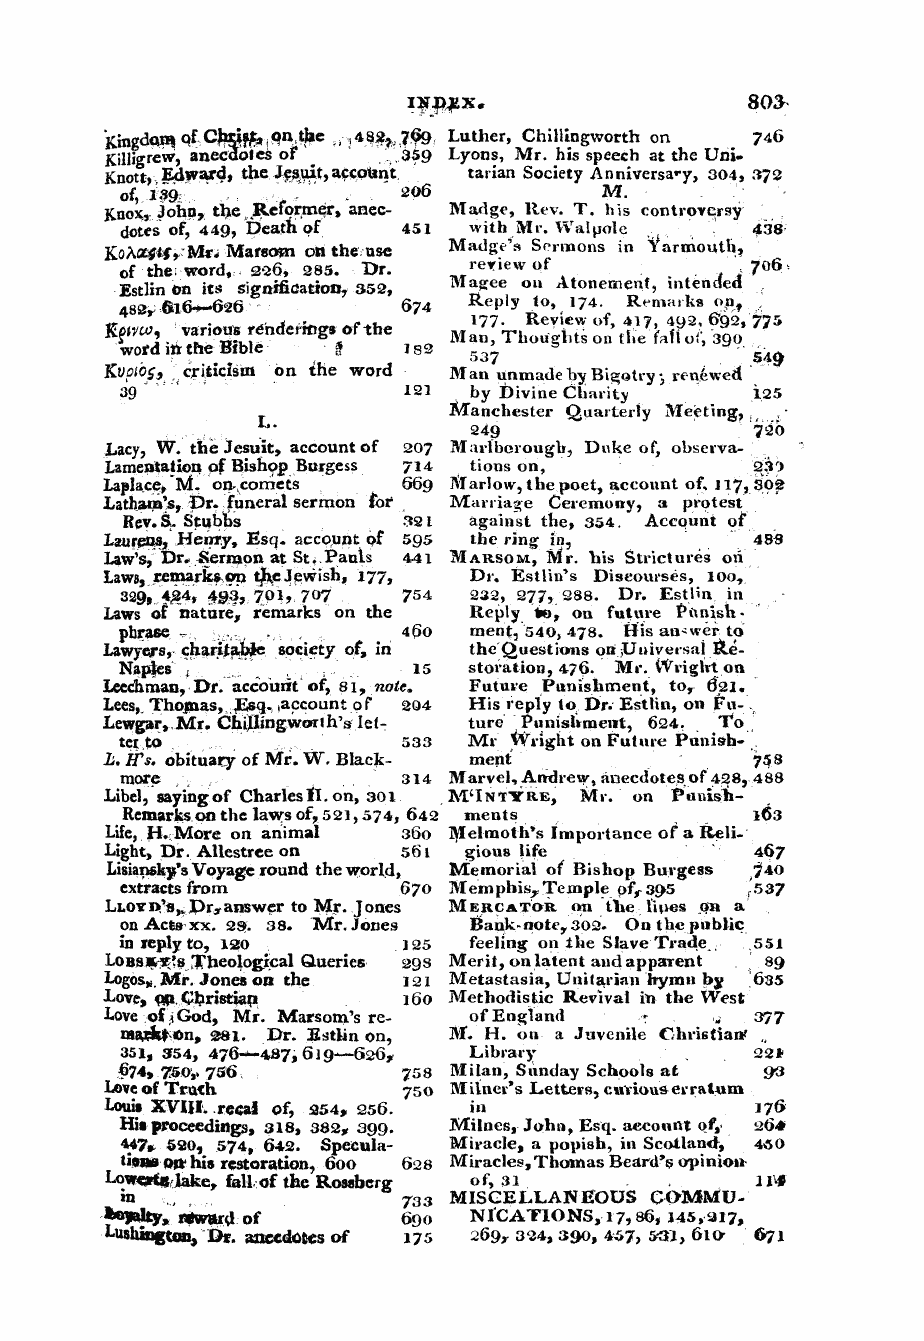 Monthly Repository (1806-1838) and Unitarian Chronicle (1832-1833): F Y, 1st edition, End matter - Untitled Article